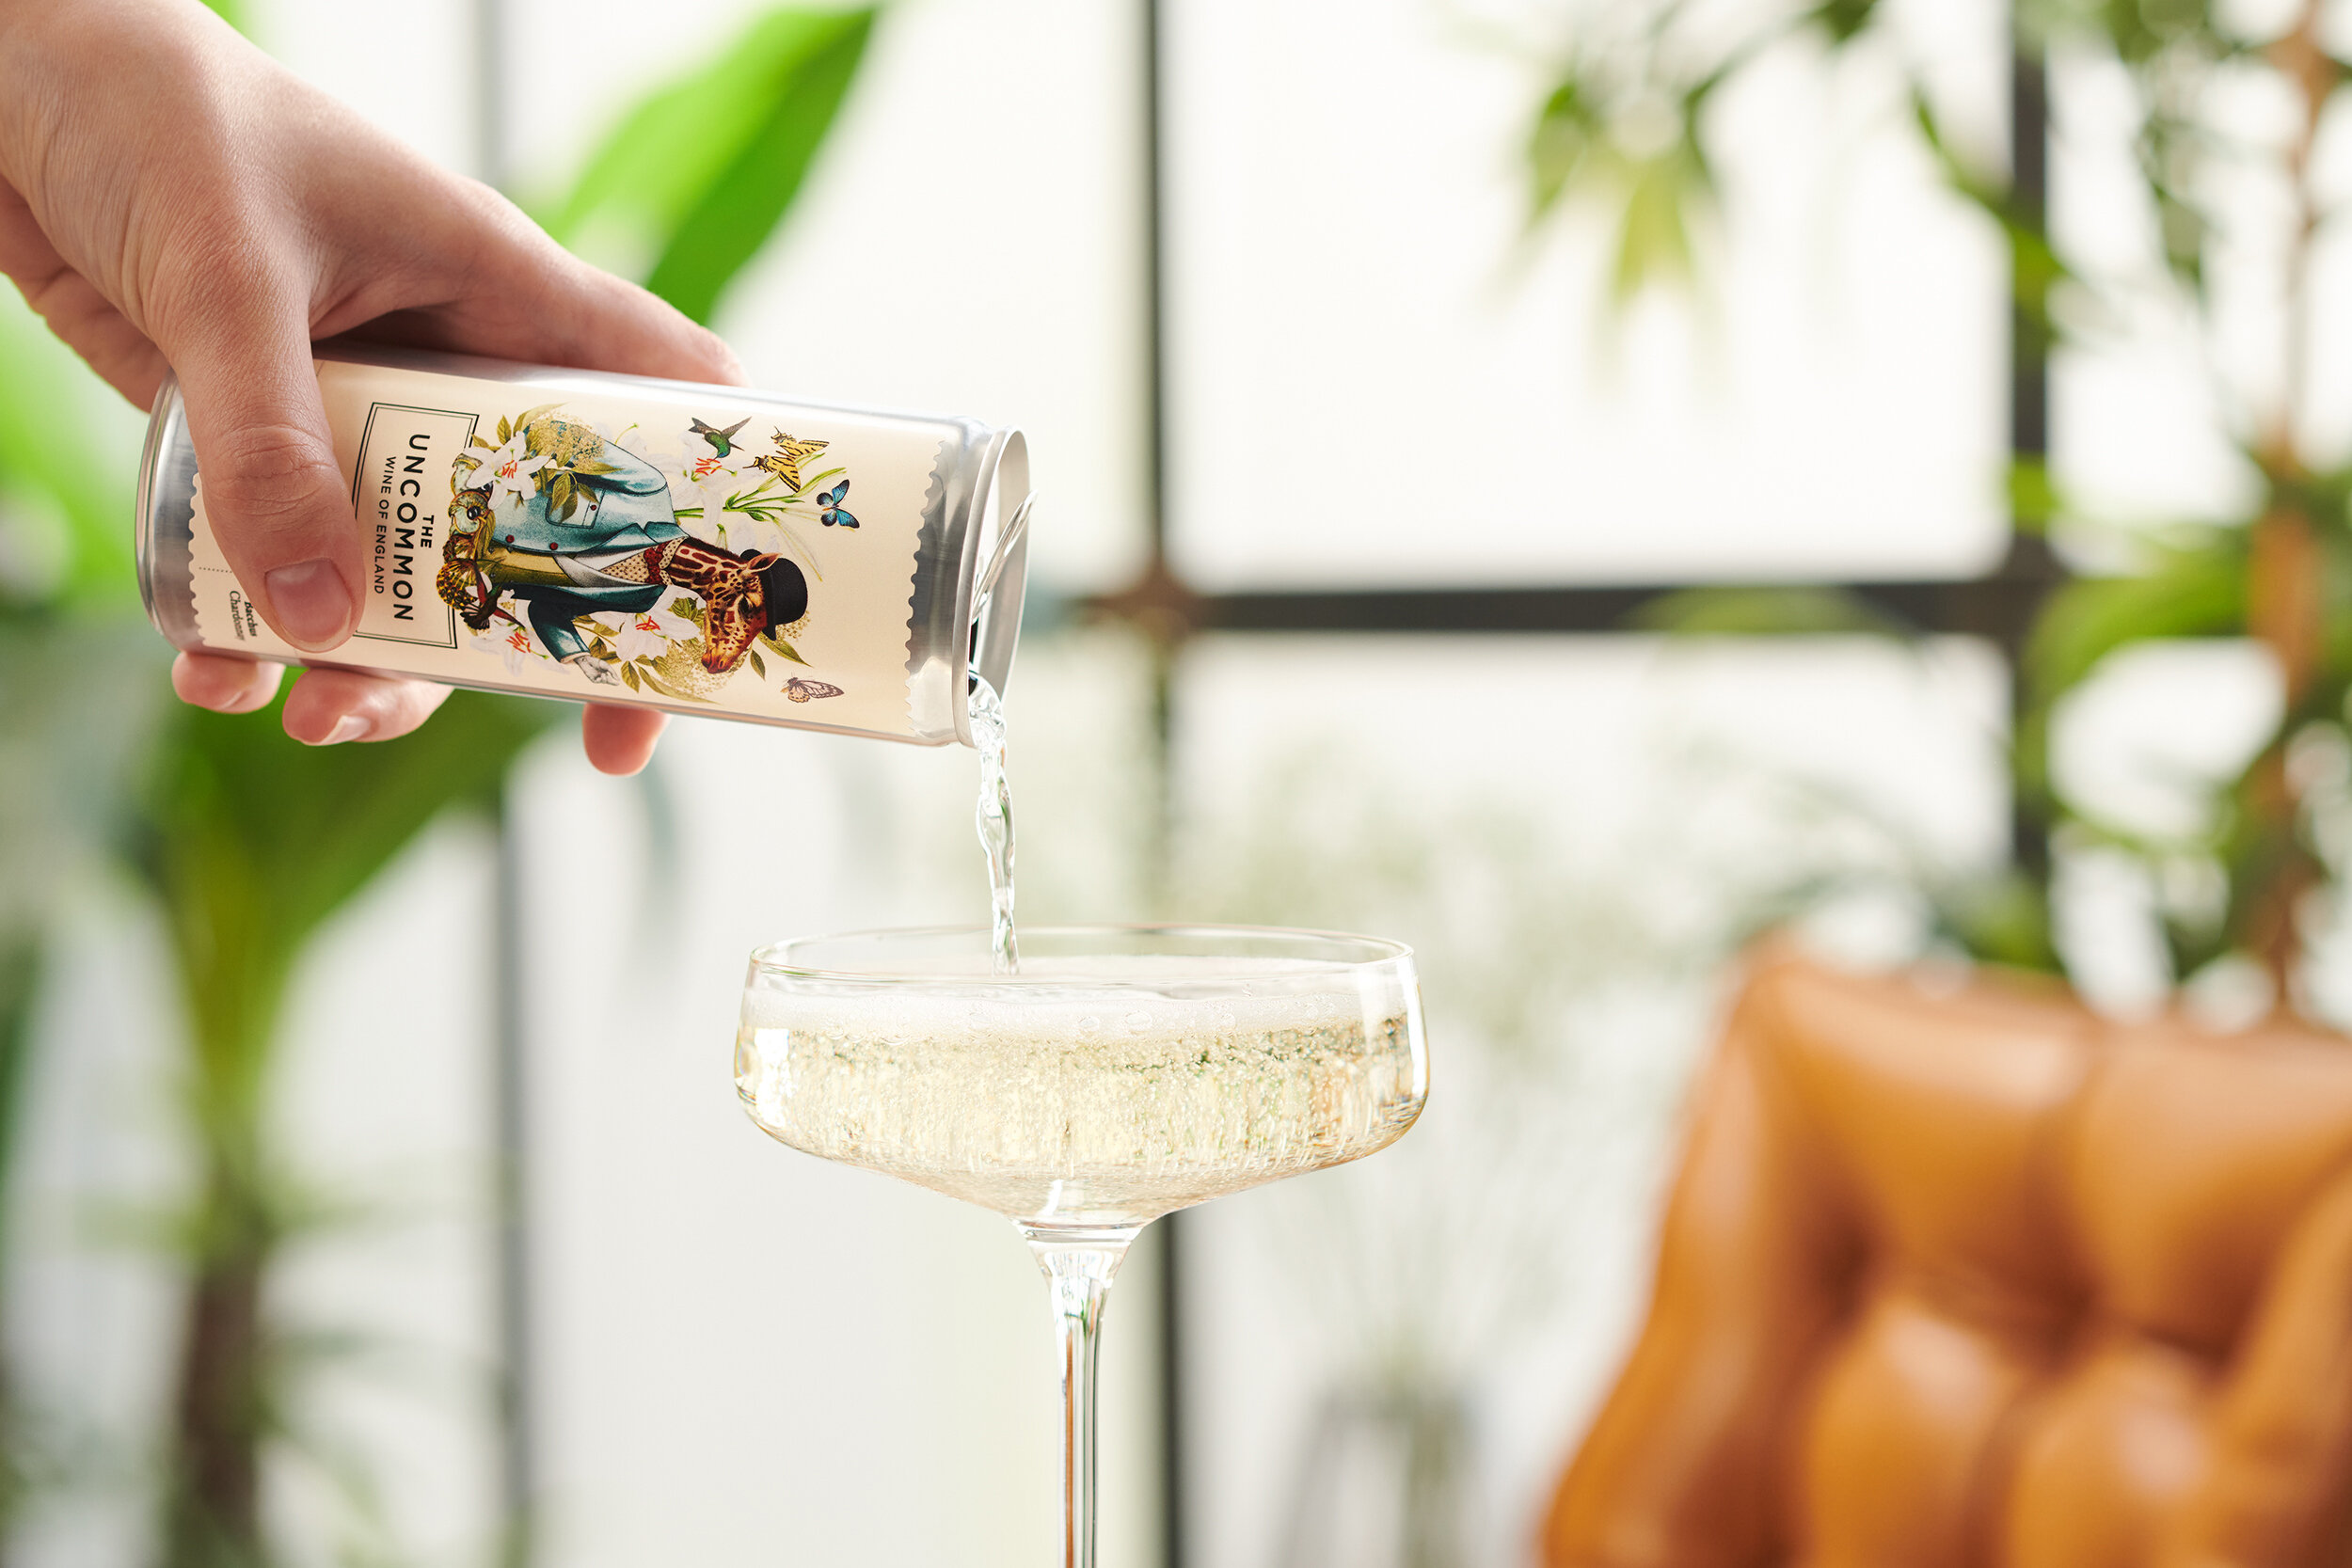  Drinks photography campaign for The Uncommon, a drinks brand who produce premium English bubbly wine, packaged in beautifully illustrated cans. 